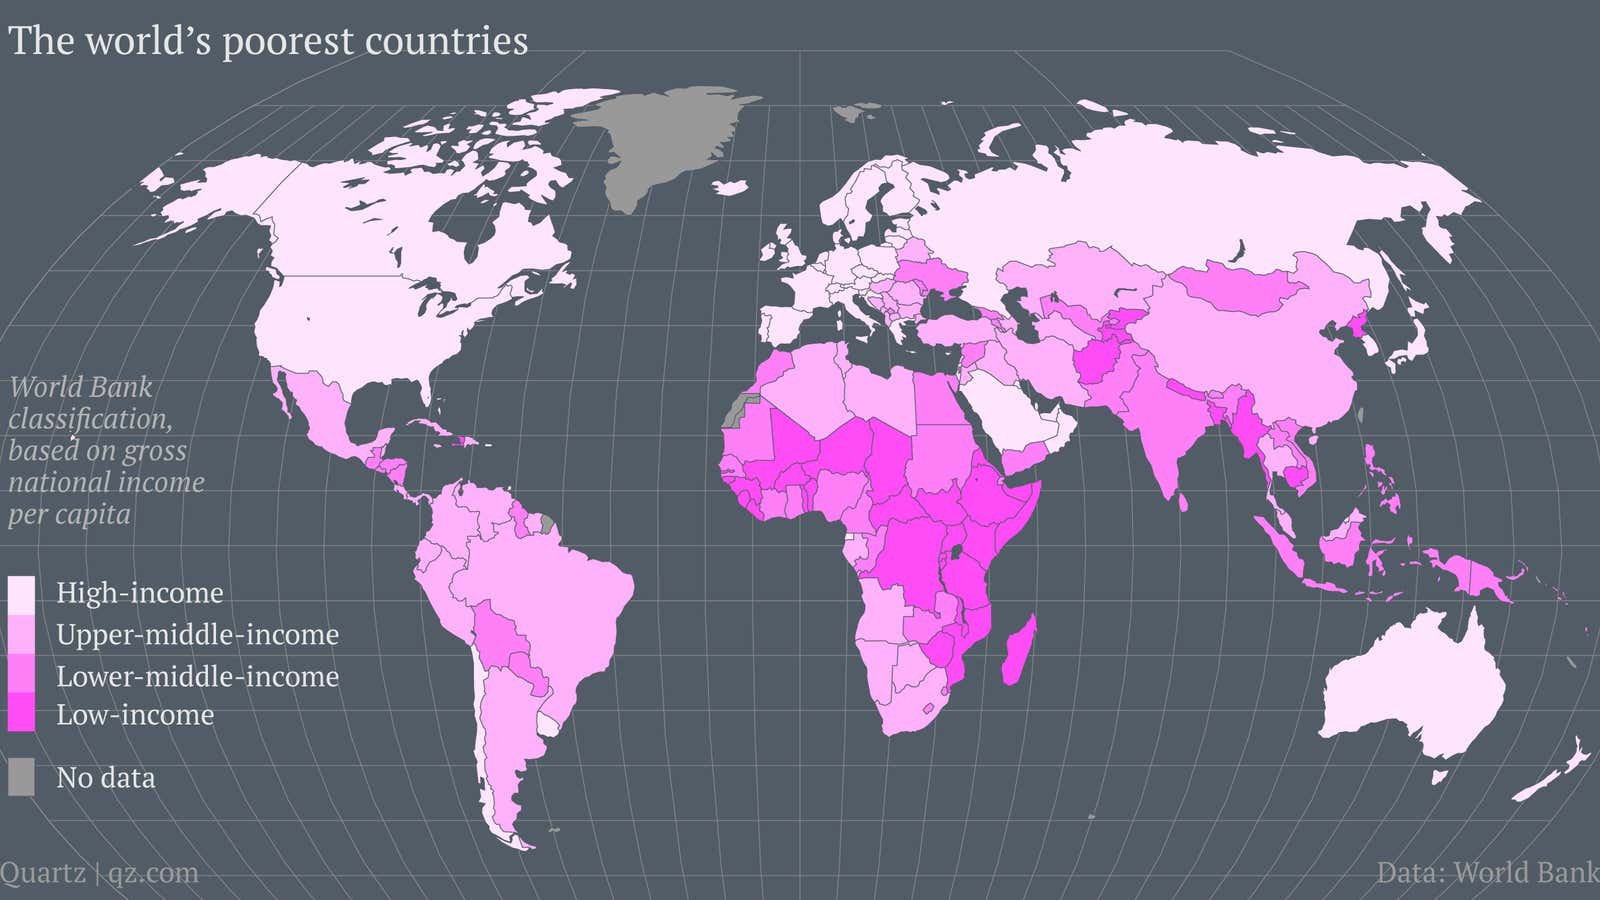 That means this map would have almost no dark pink in two decades.